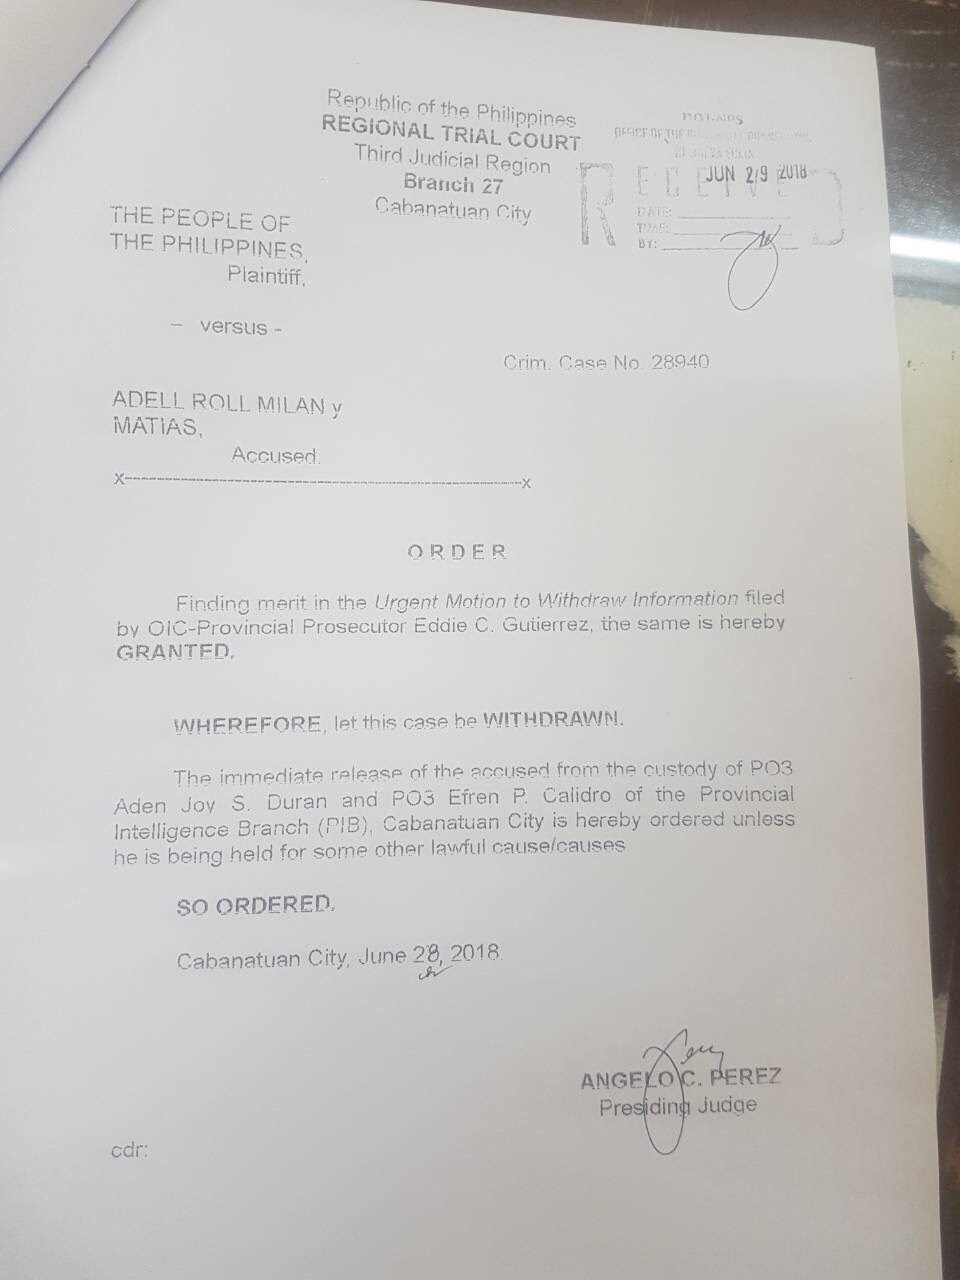 RELEASE. A photo of the order of Regional Trial Court in Cabanatuan City ordering the release of Adell Milan.  